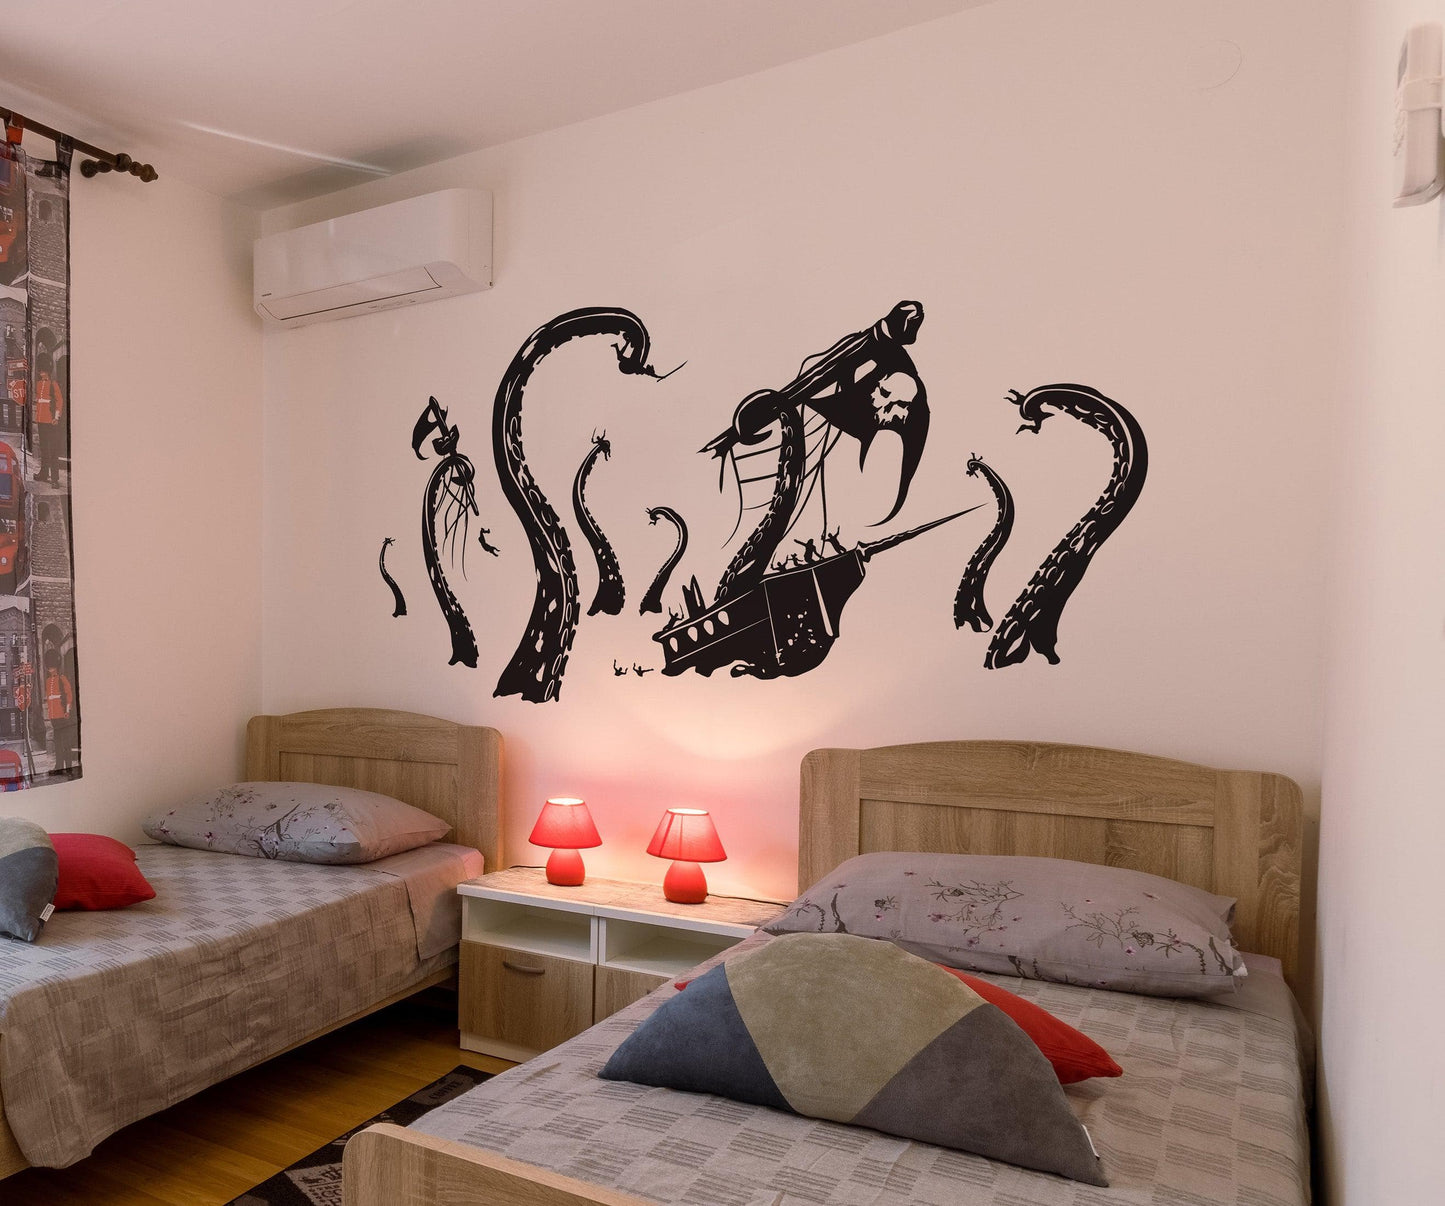 Kraken Attack Pirate Ship Wall Decal - Thrilling Decor for Boy's Room. #GFoster166